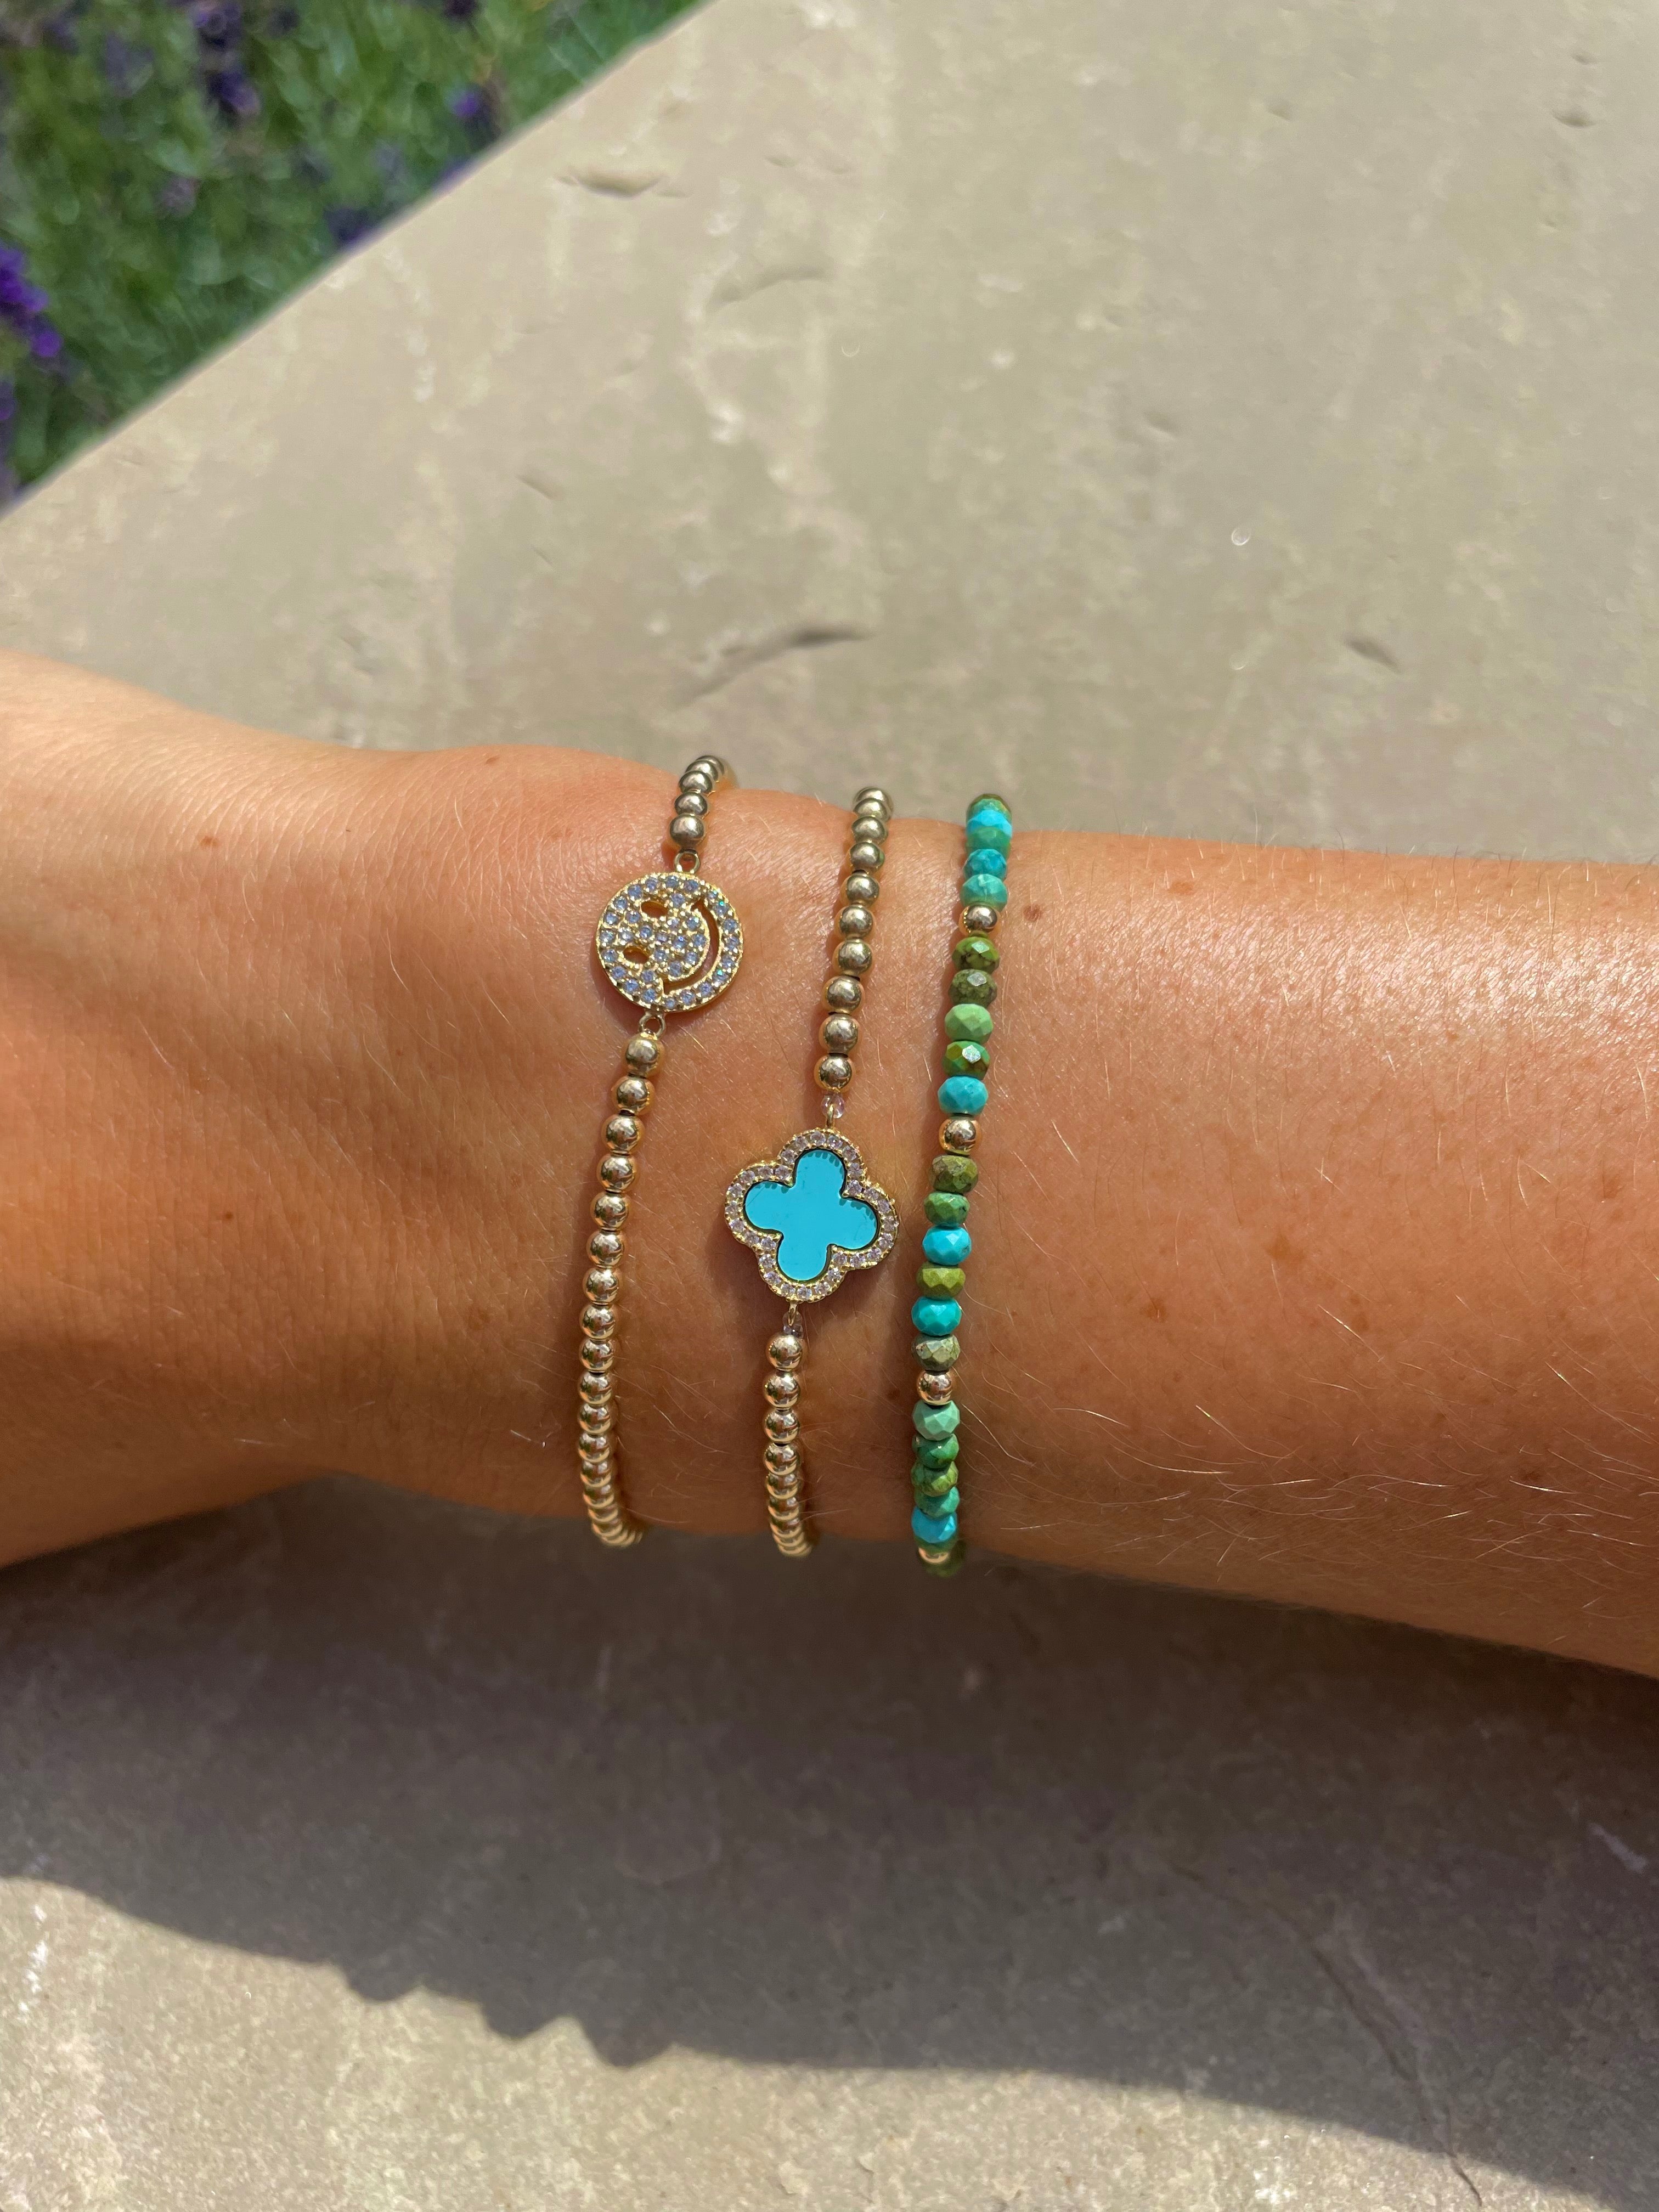 gold beaded bracelets with smiley face and turquoise clover pendant